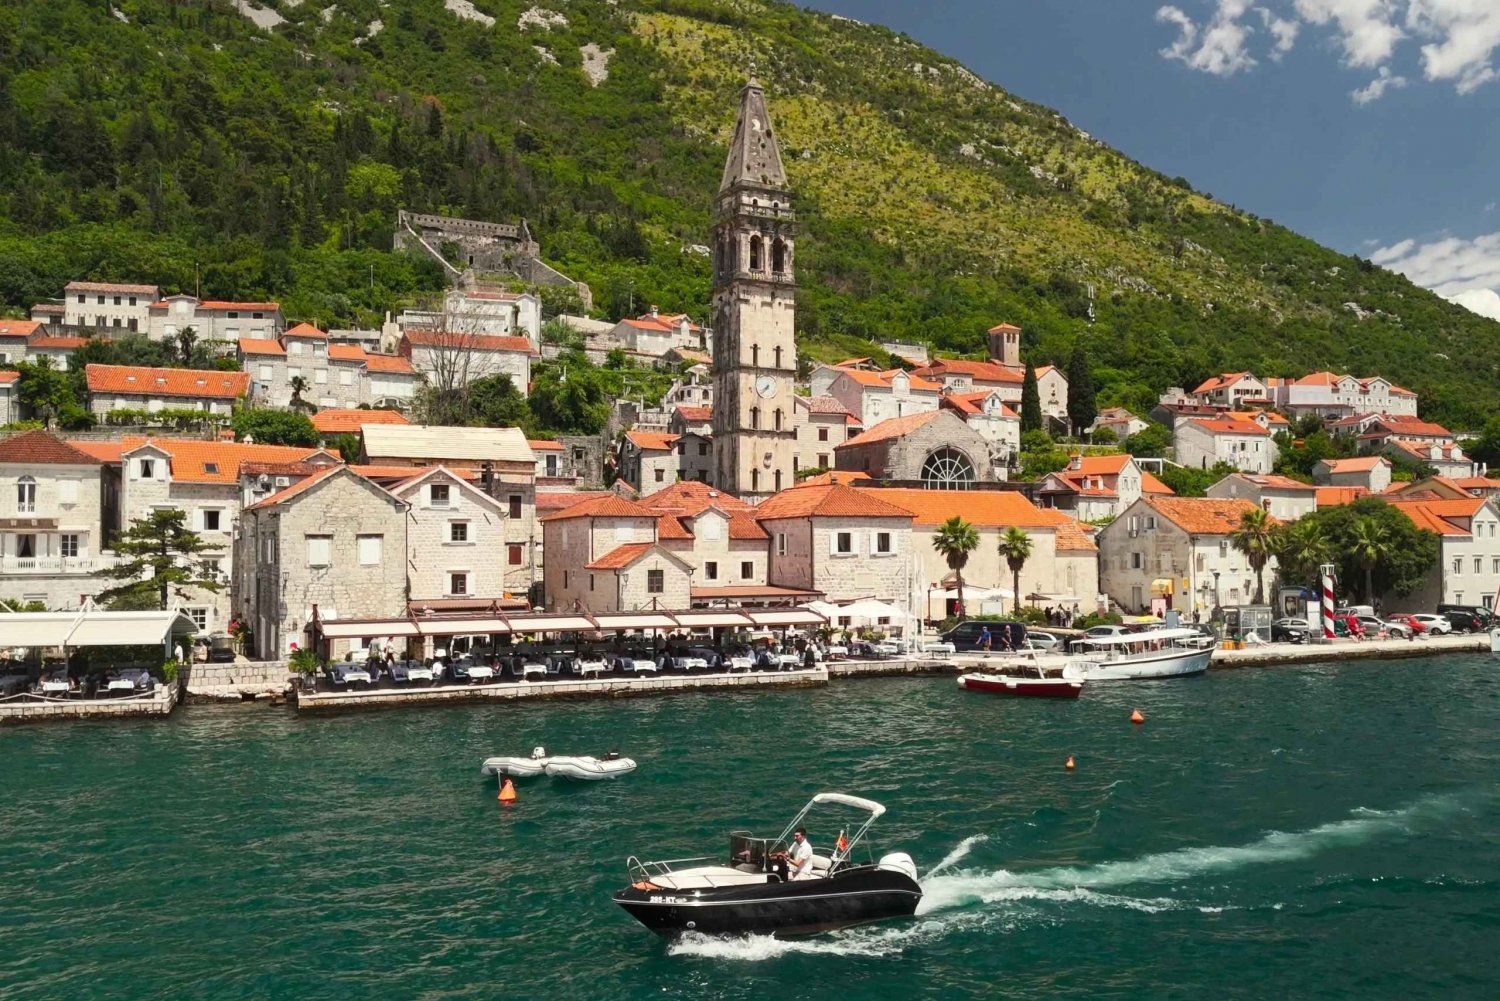 Kotor: Our Lady of the Rocks & Perast Old Town Boat Tour